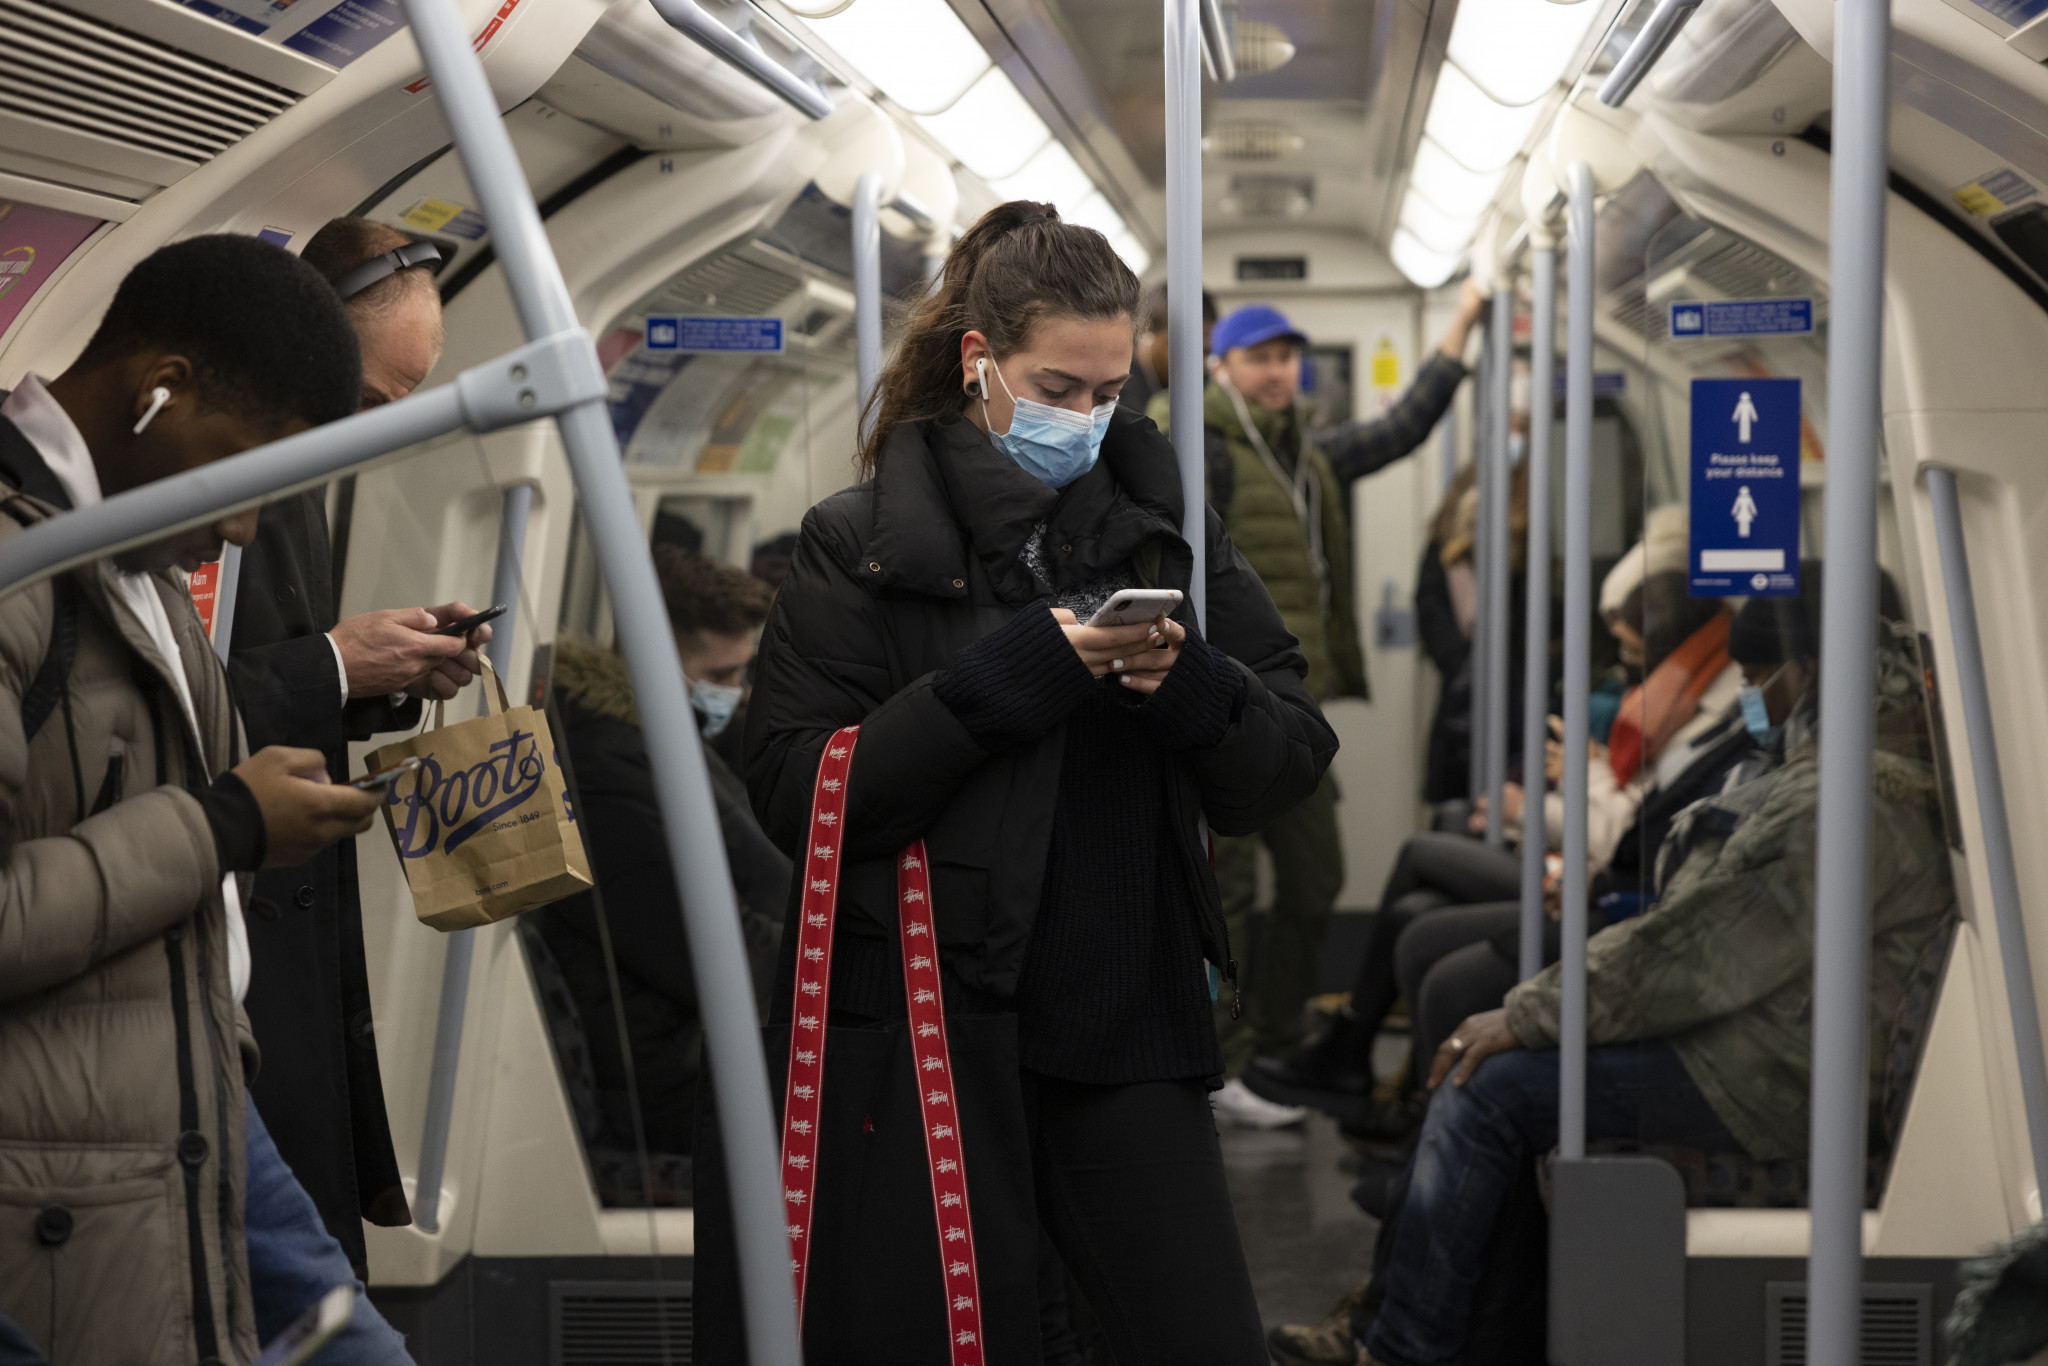 Masks have been made compulsory on public transport in England as part of efforts to reduce the spread of the new COVID-19 variant ©Getty Images